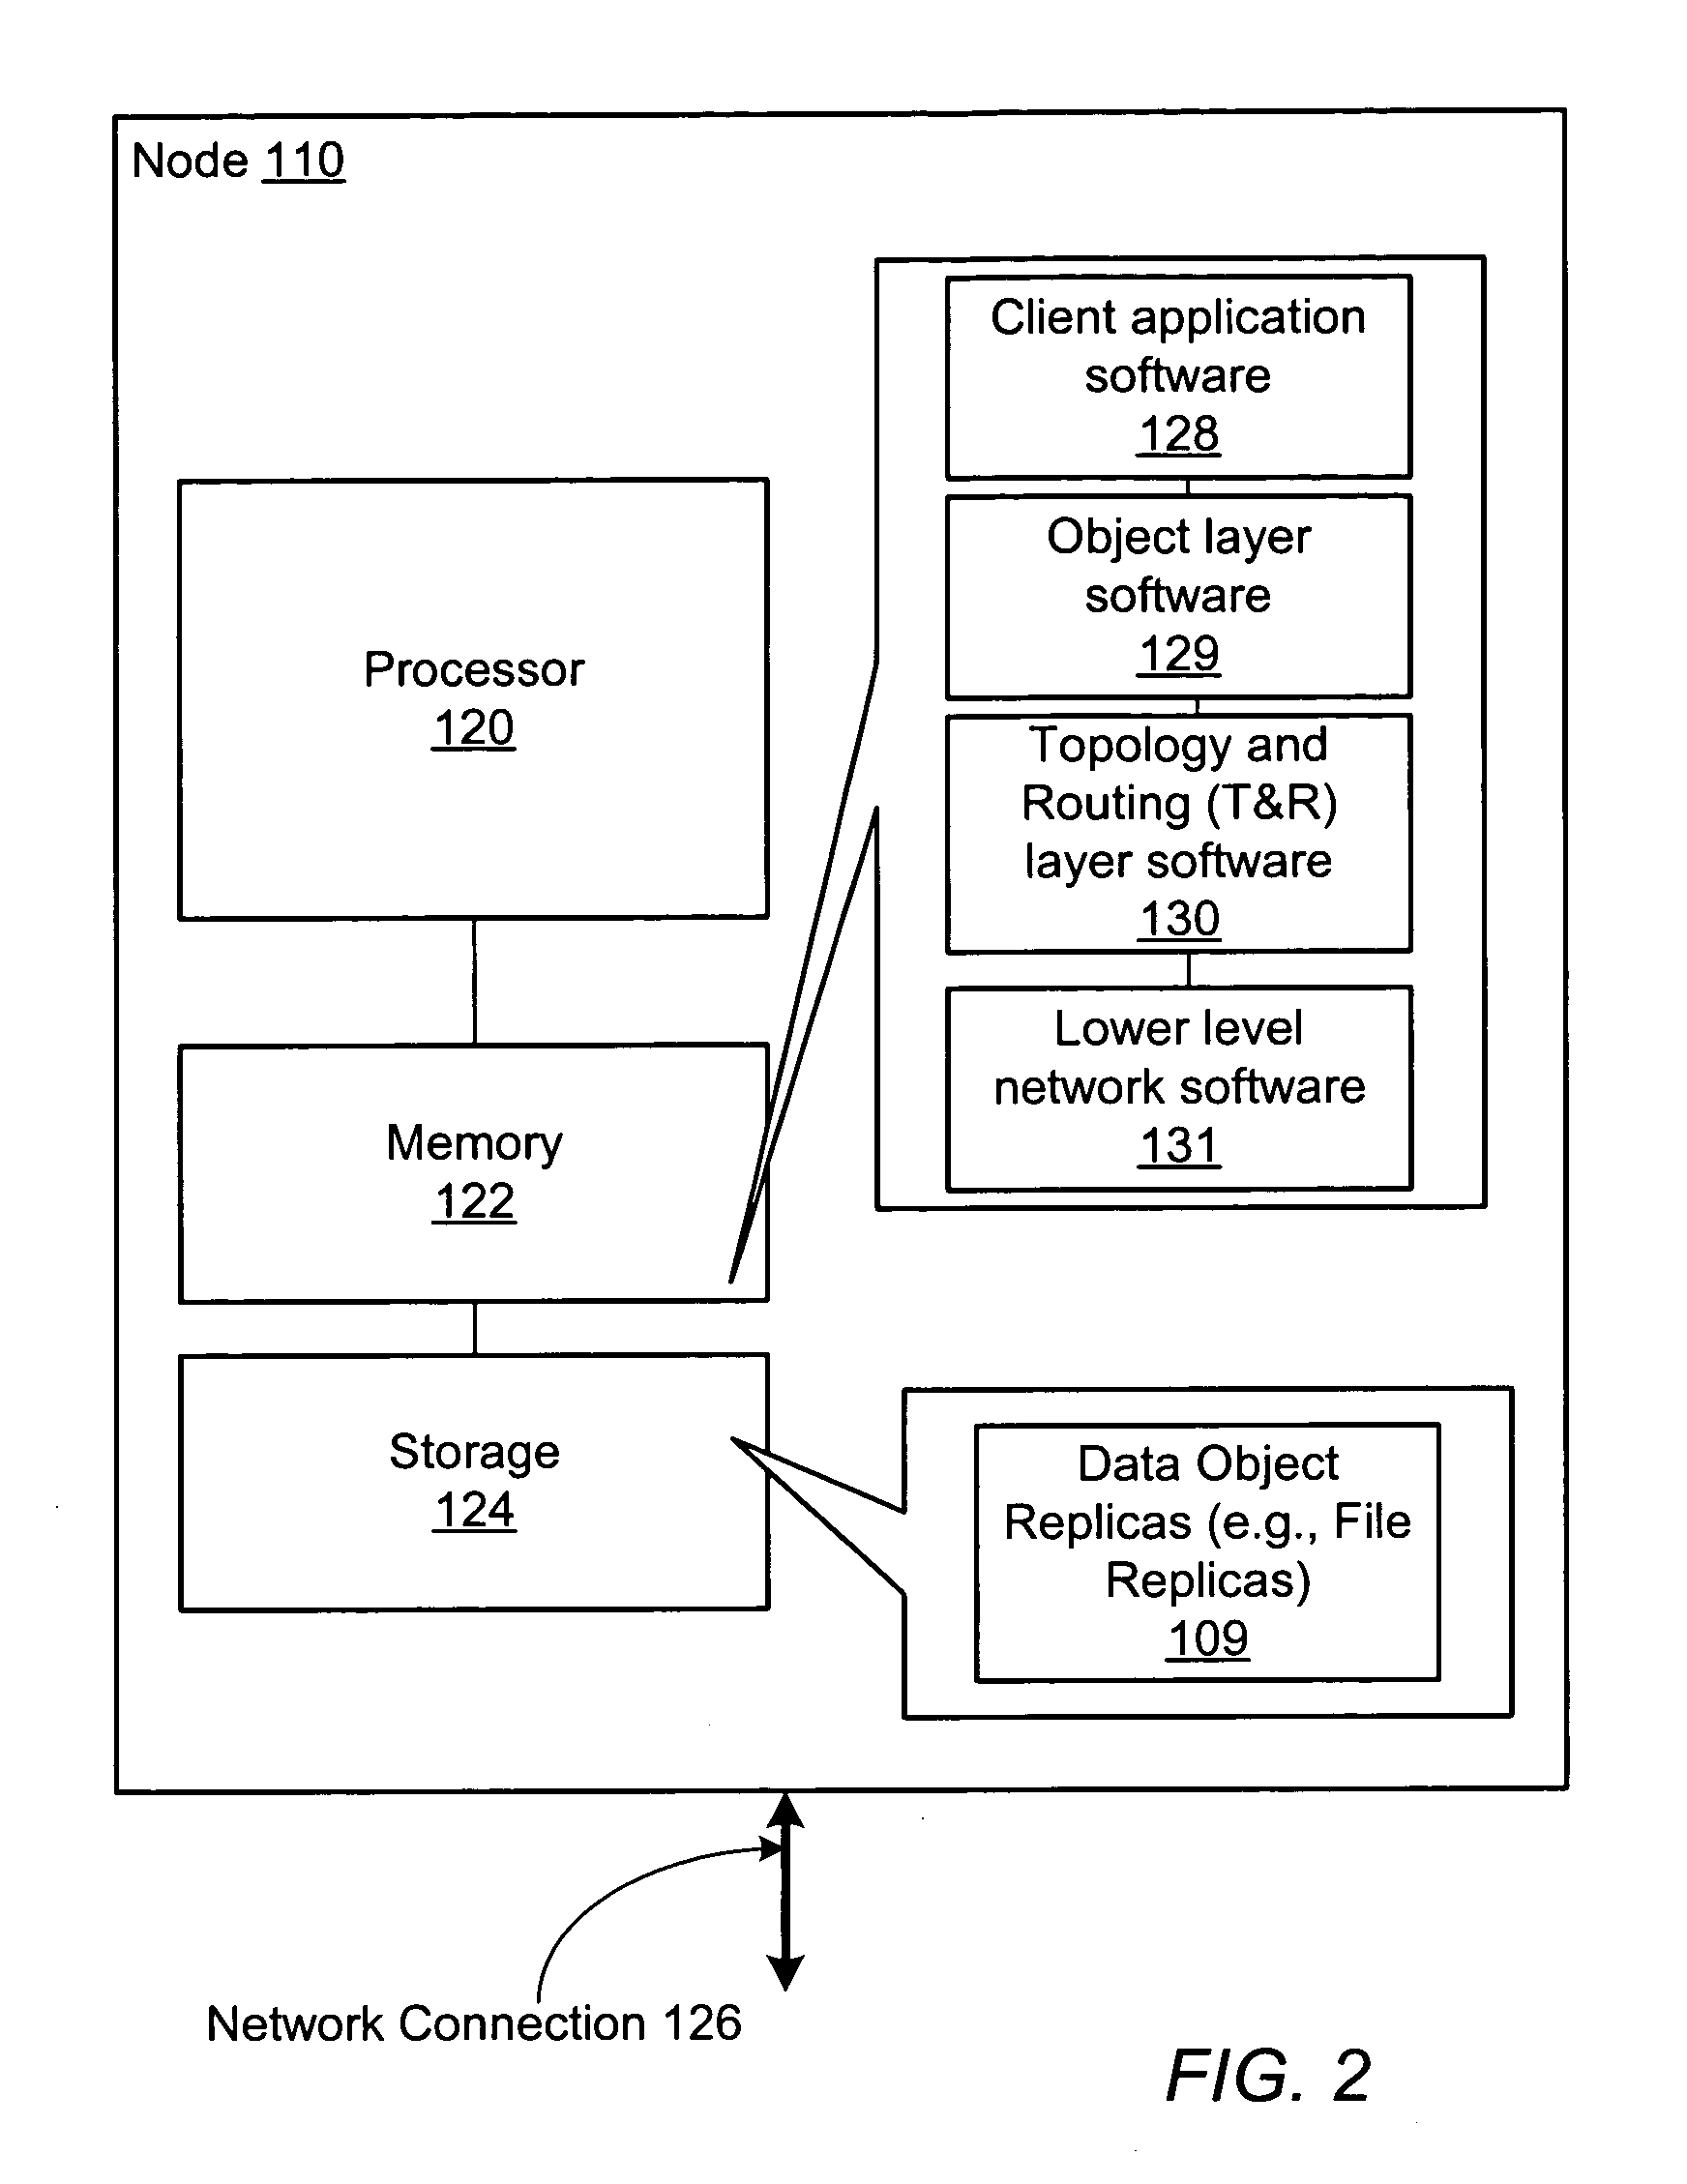 Conflict resolution for a distributed file sharing system